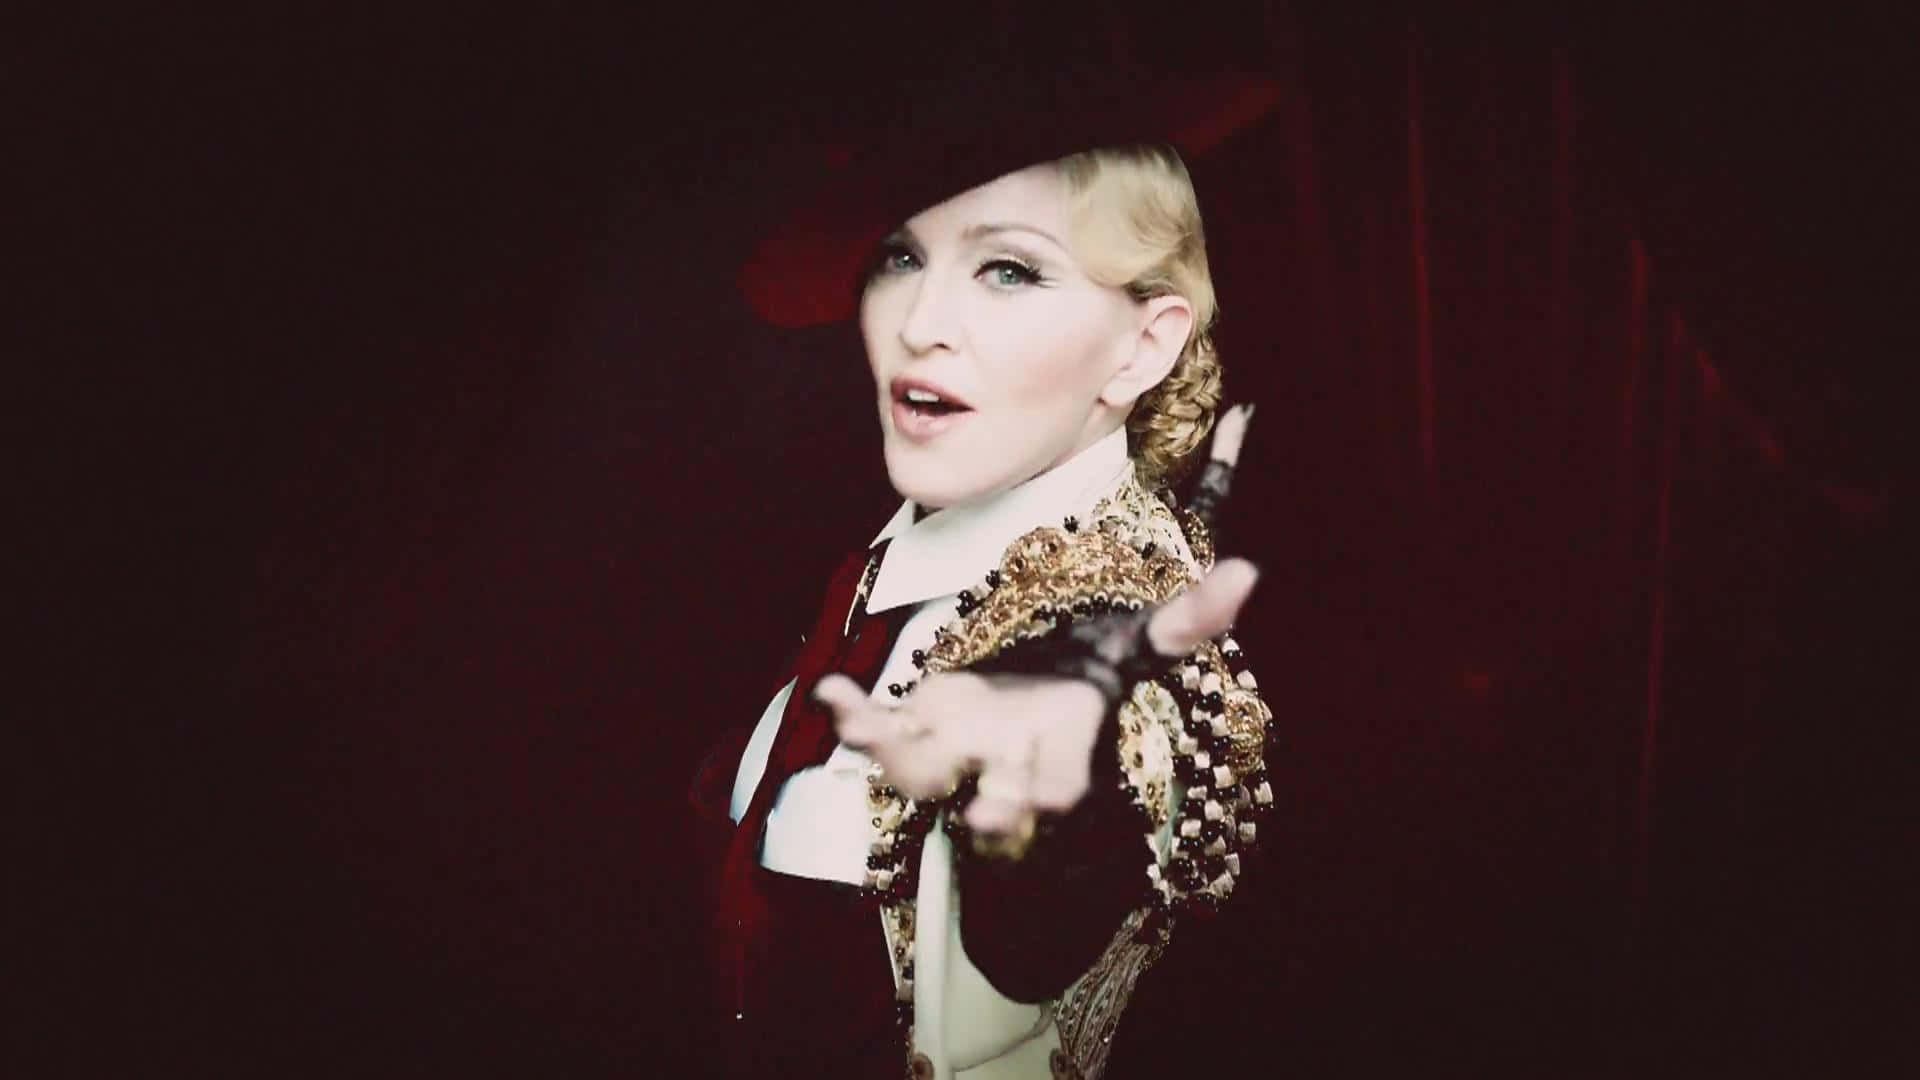 Madonna channels her iconic music video look in this timeless portrait